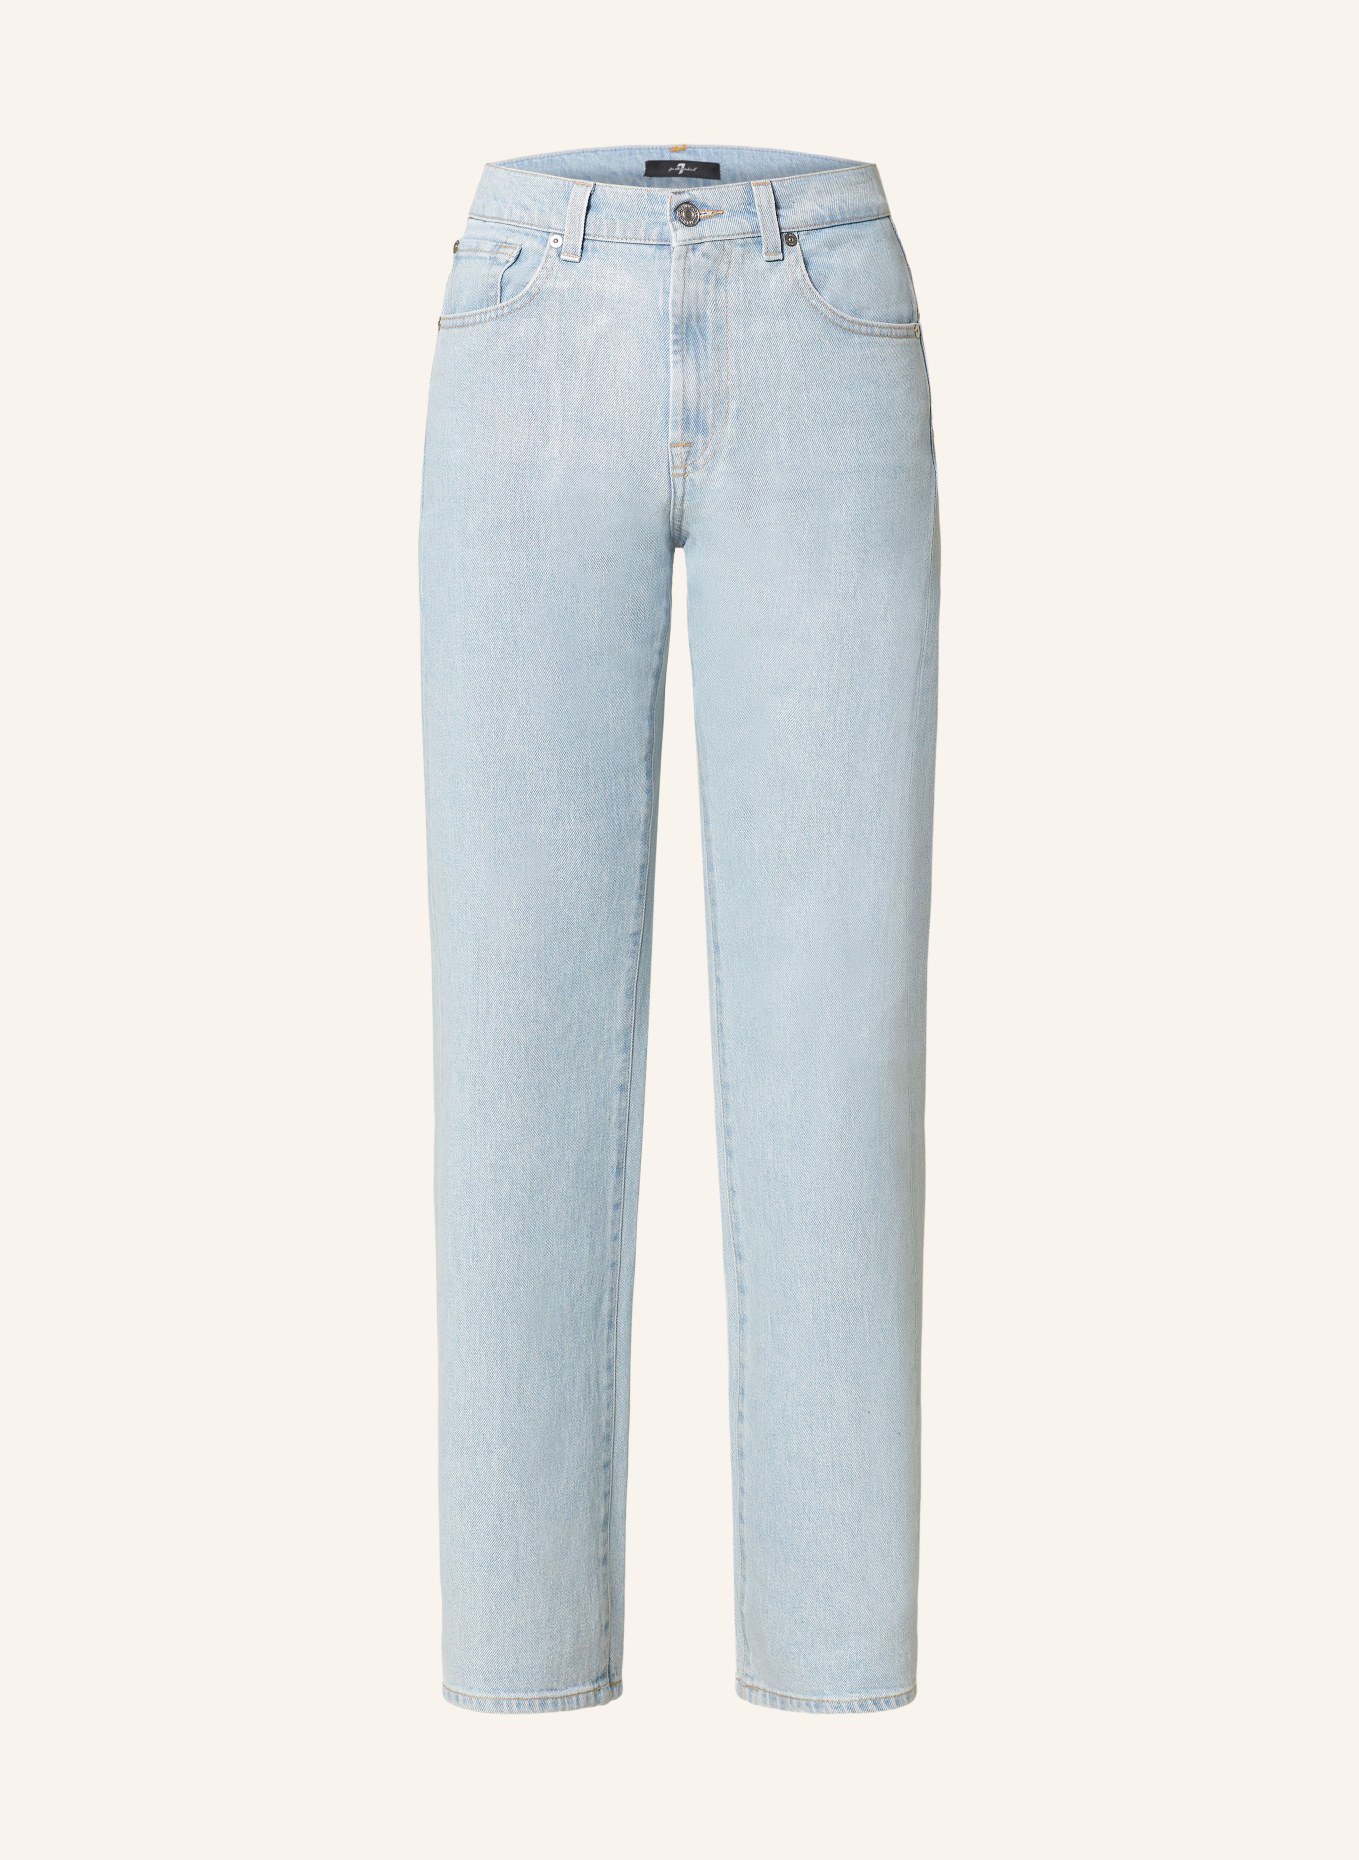 7 for all mankind Straight Jeans, Farbe: LIGHT BLUE (Bild 1)